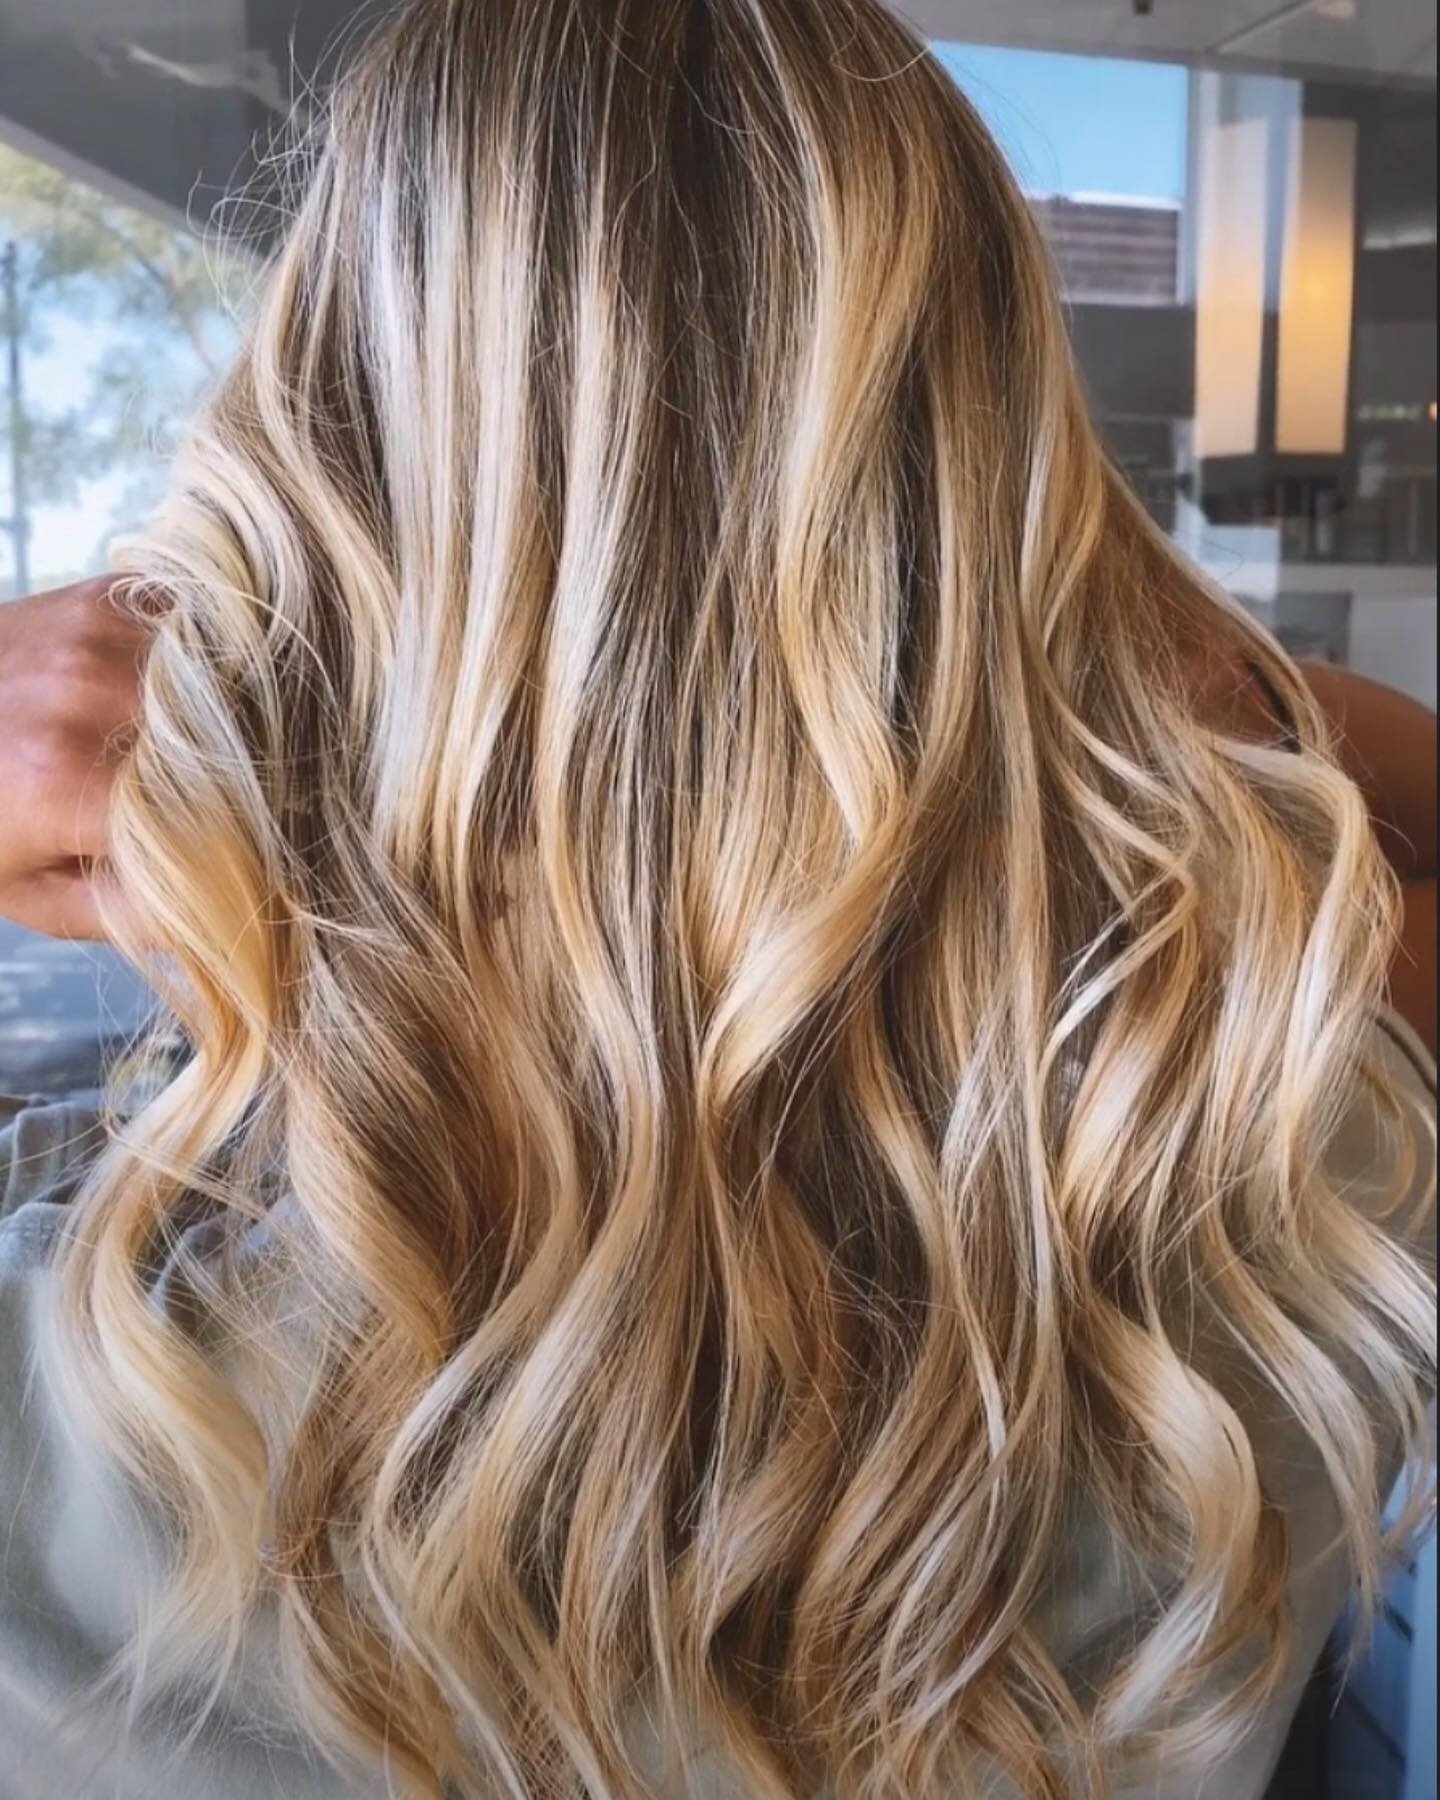 The perfect prelude to fall&hellip; highlights by @colorbygail ☀️🍁
.
.
.
.
.
.
.
#haircolorist #fallbalayage #indiansummer #labordayweekend #behindthechair  #highlights #endofsummer 
.
.
.
.
.
.
.
.
.
.
@cosmopolitanuk @allure @mainlineparent @mainl